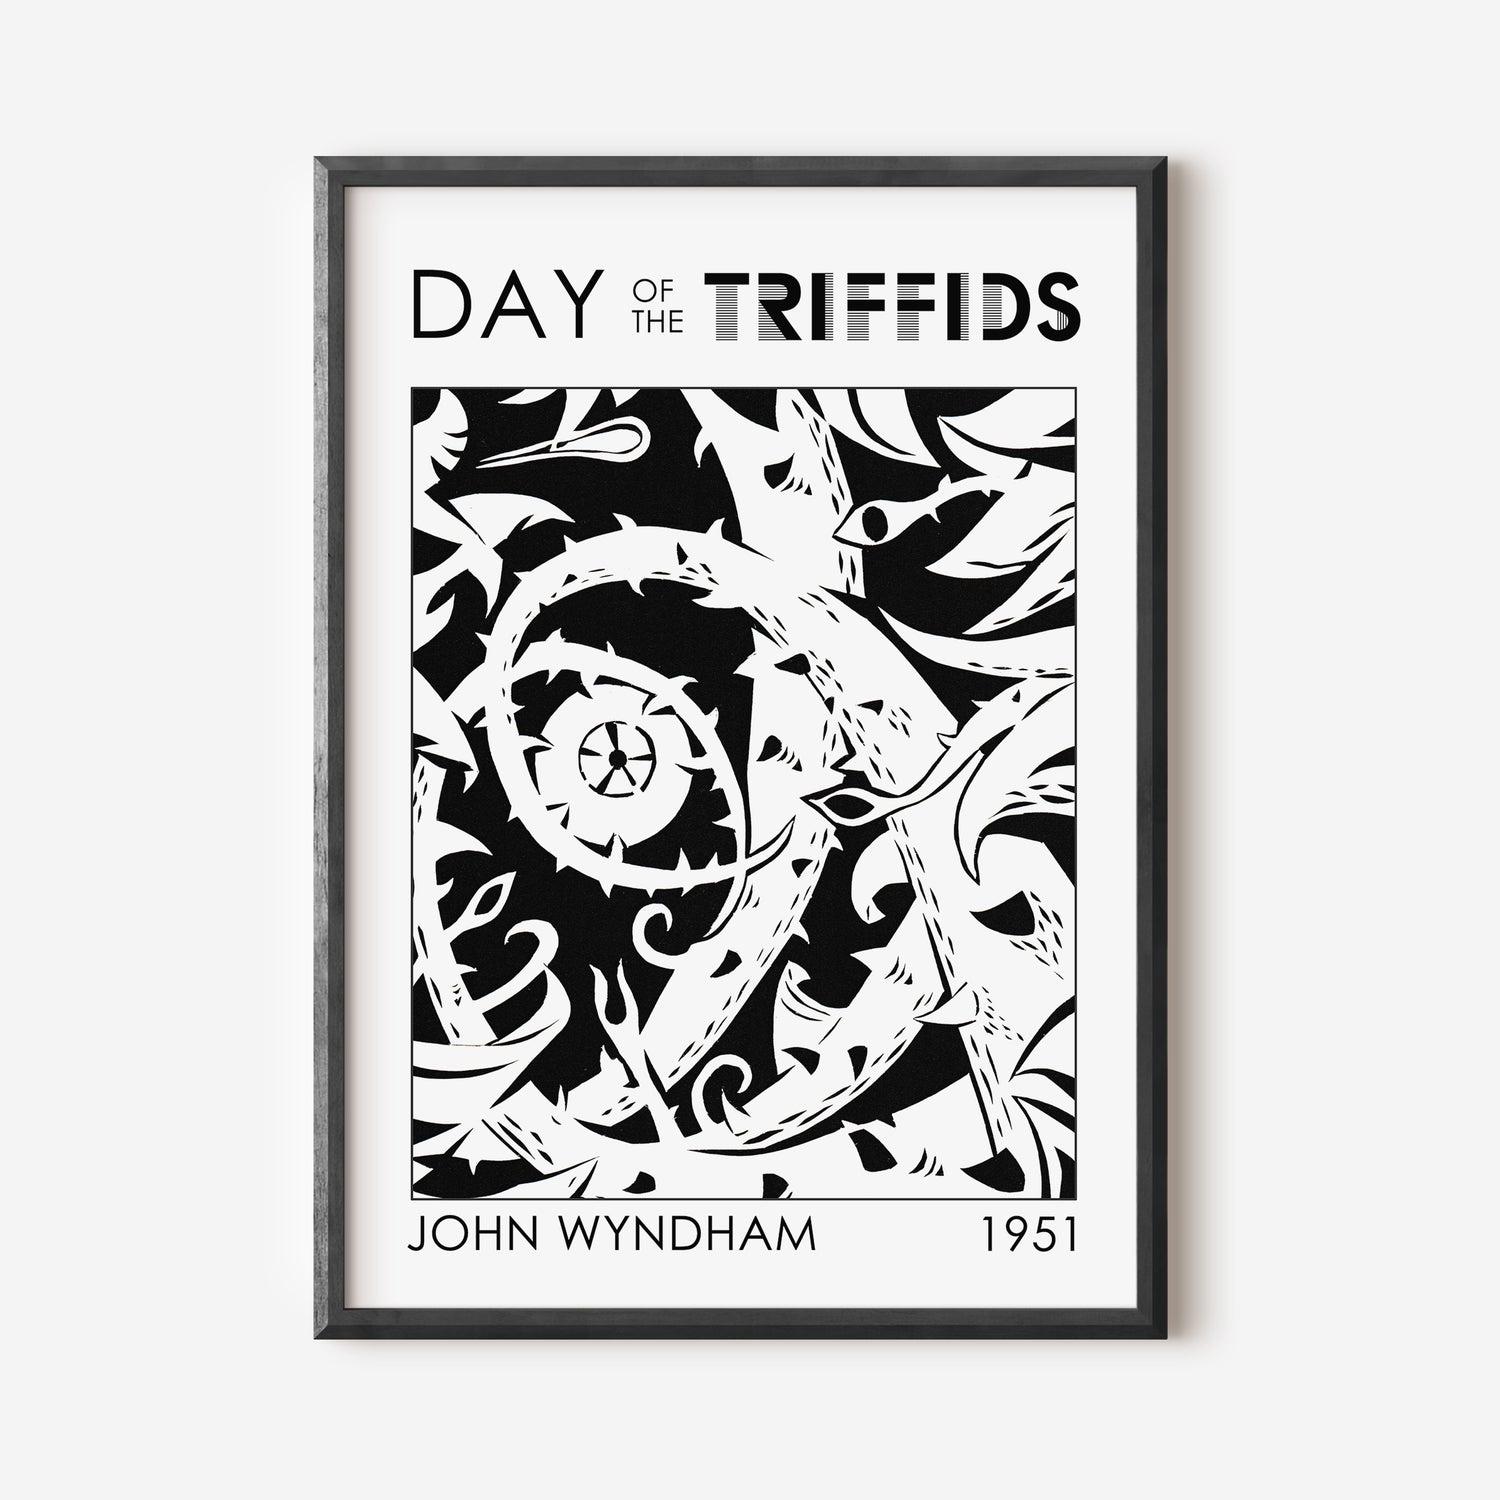 day of the triffids black and white art print stingers surround and pirece a human eye as the comet passes overhead